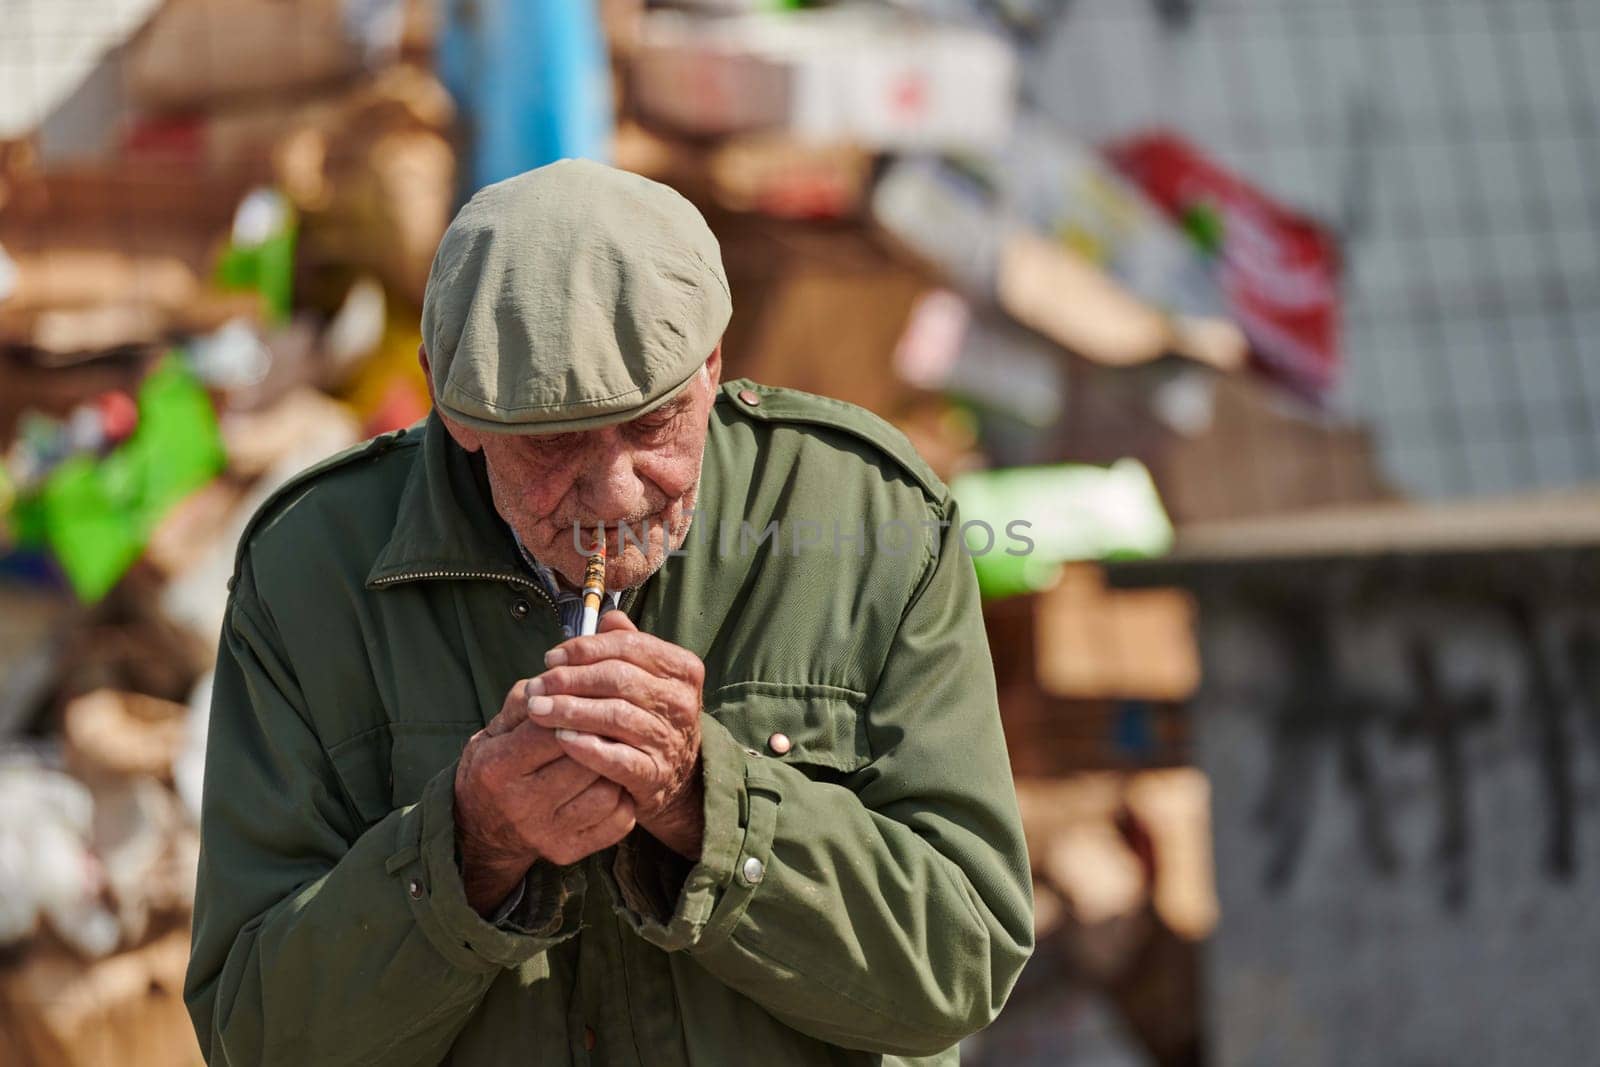 An elderly man is captured smoking a cigarette while wearing a dark green jacket and cap, exuding a sense of timeless style and sophistication.